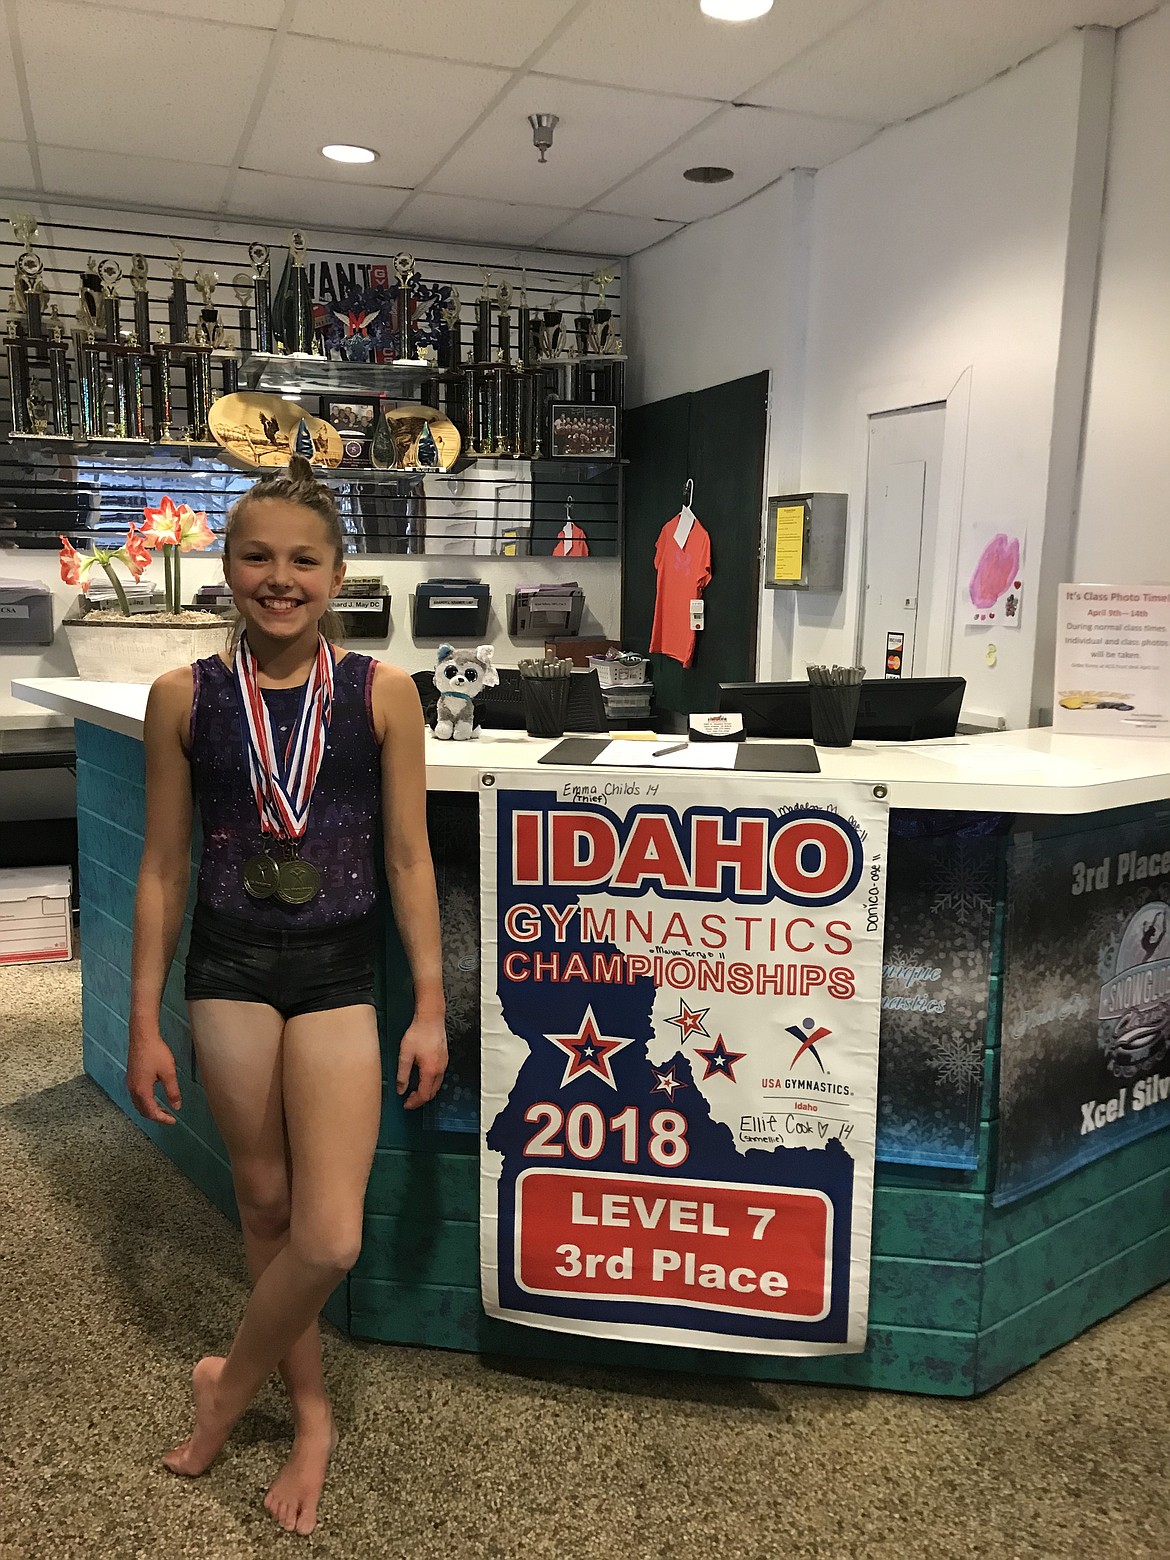 Courtesy photo
Avant Coeur Level 7 gymnast Madalyn McCormick took second All-Around in Pocatello during the Junior Olympics Championships, which landed her a spot to compete for the state of Idaho in Kansas City in January 2019 on the Level 7 state team.